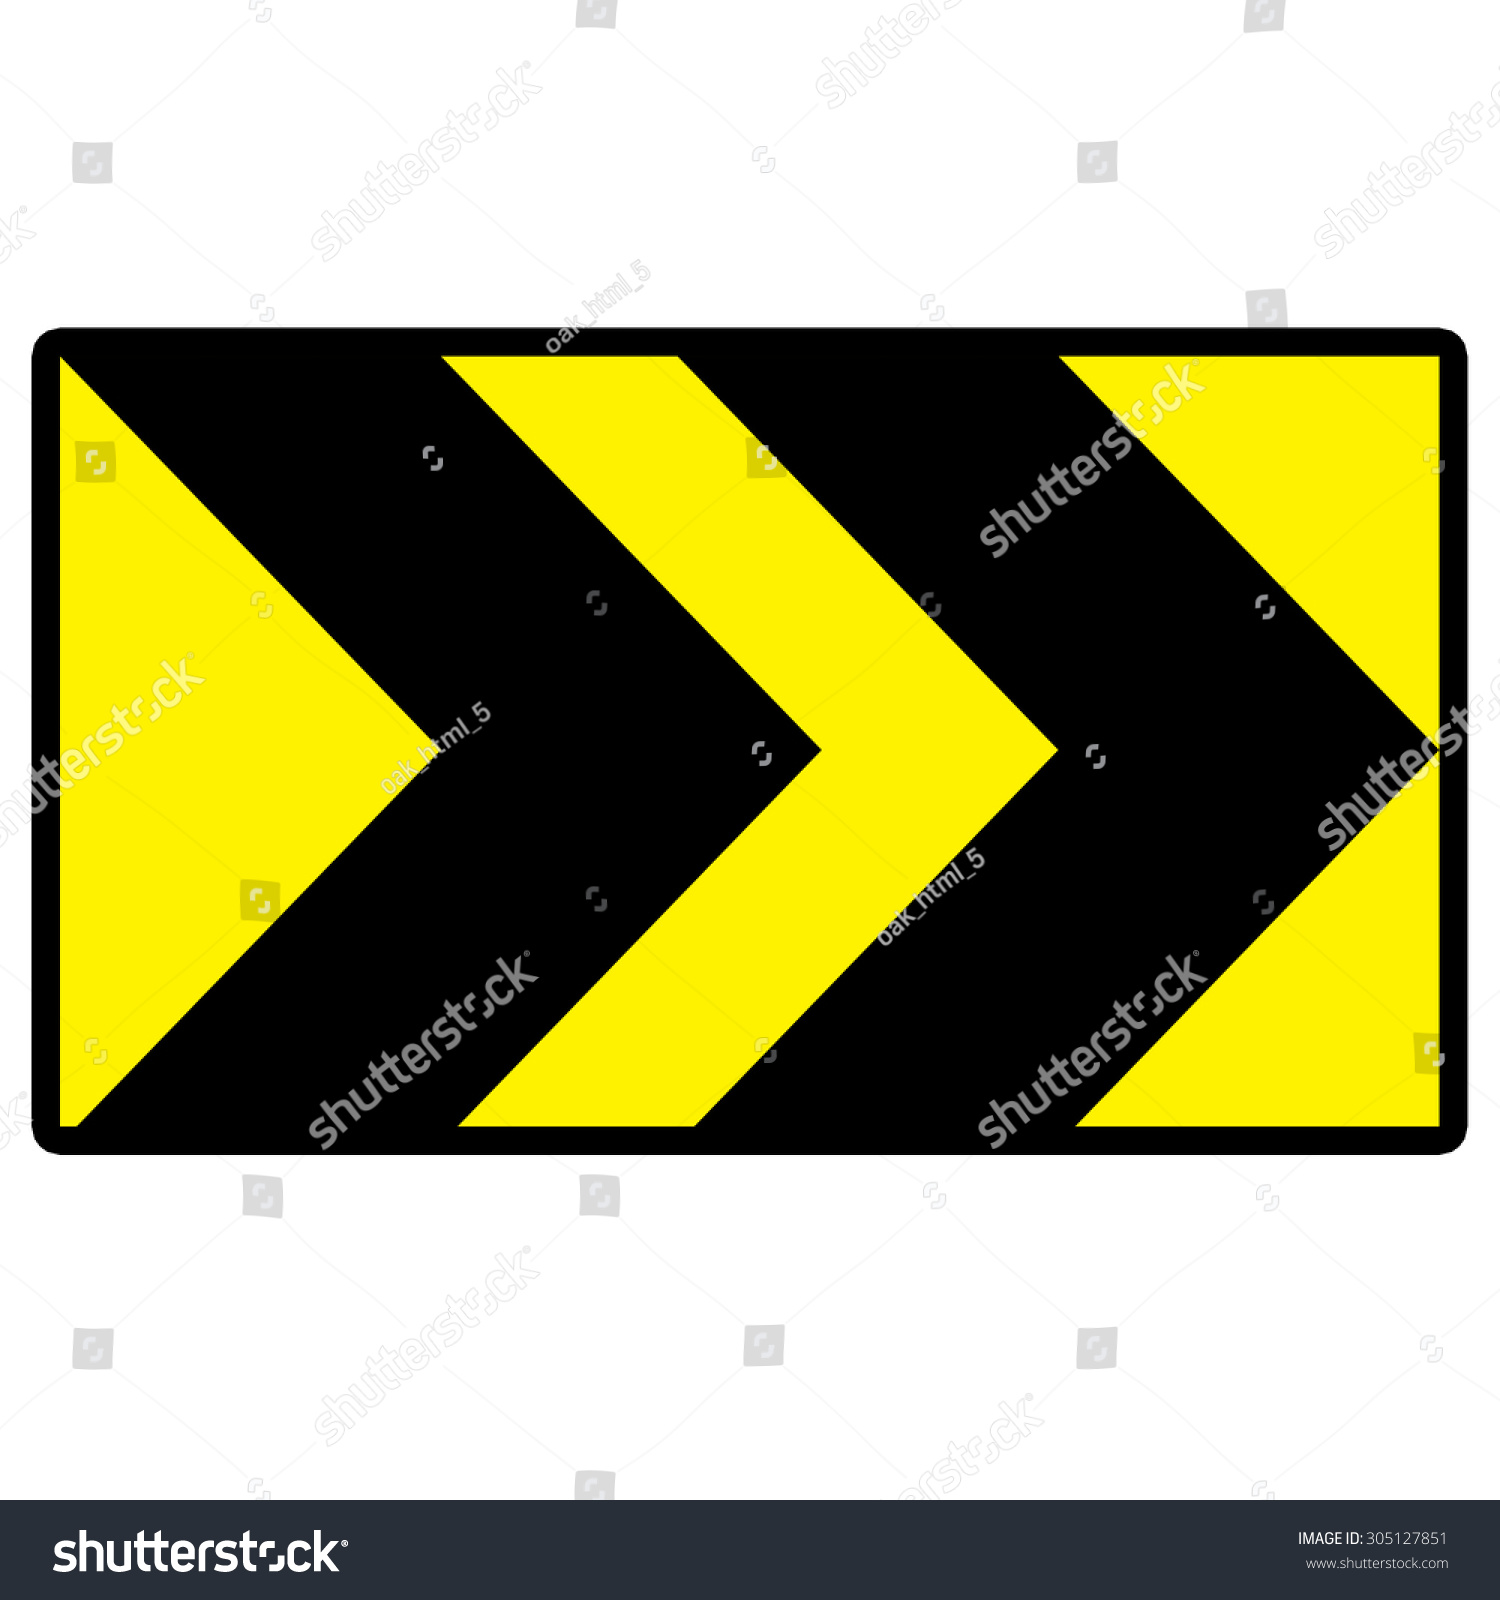 Black Traffic Sign And Yellow Traffic Signs Stock Photo 305127851